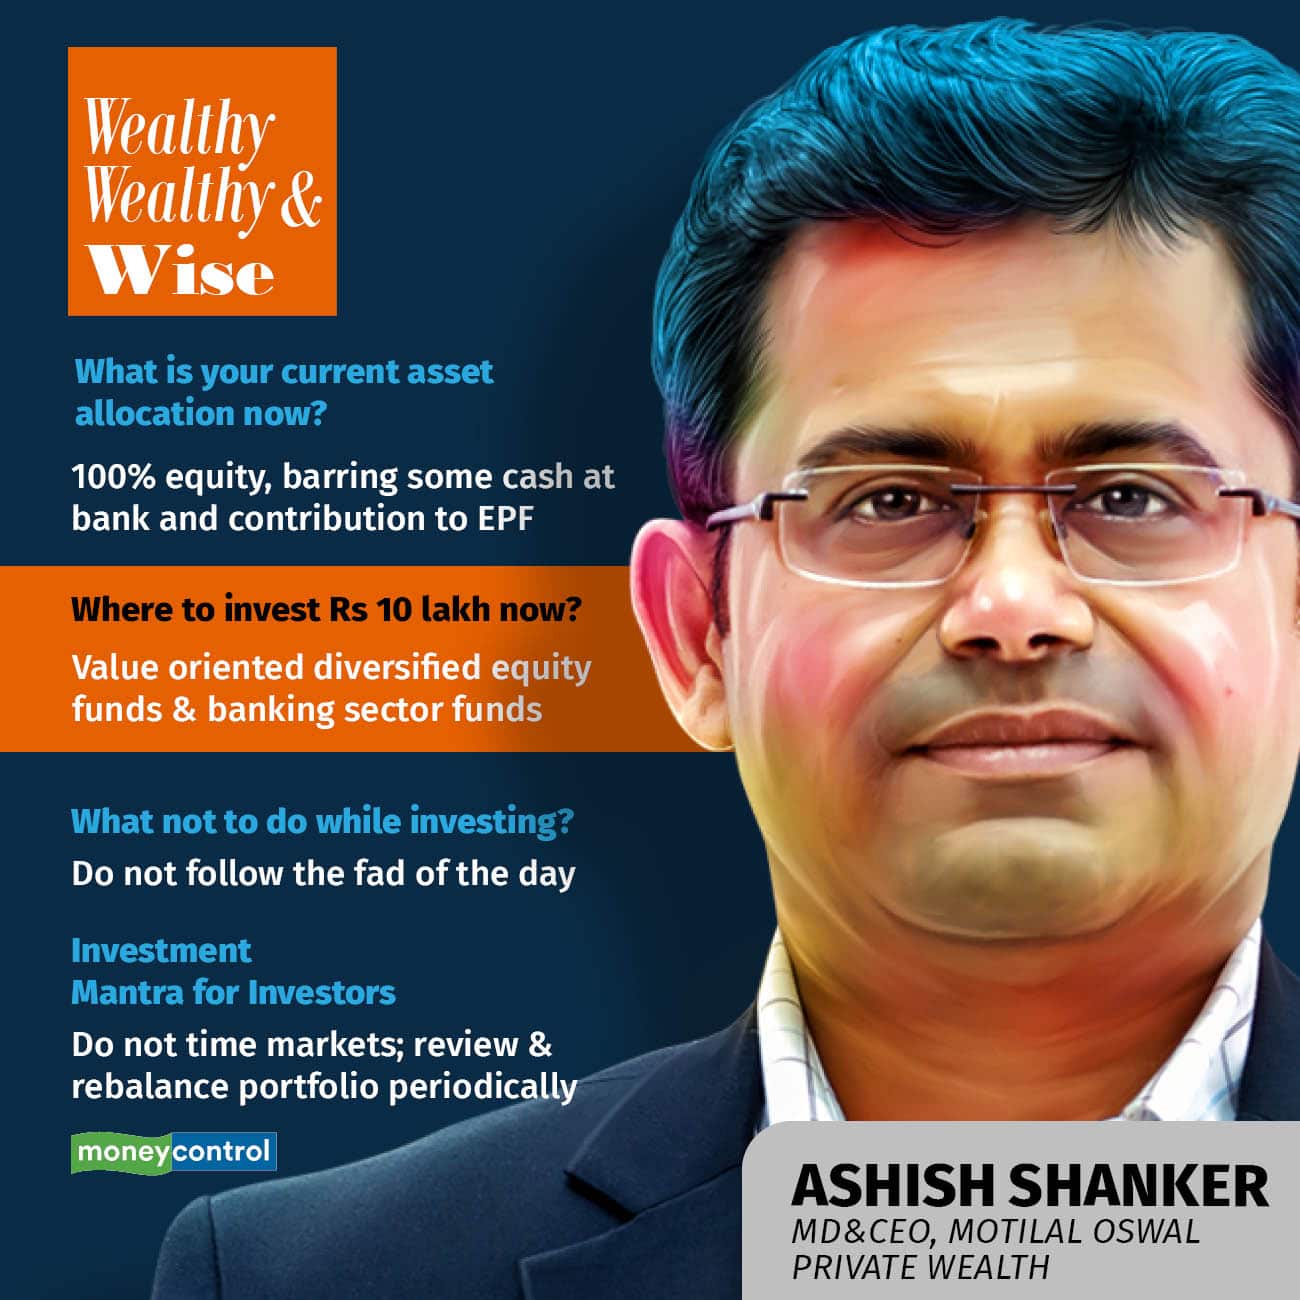 We may see a new high on Nifty later this year: Ashish Shanker of ...